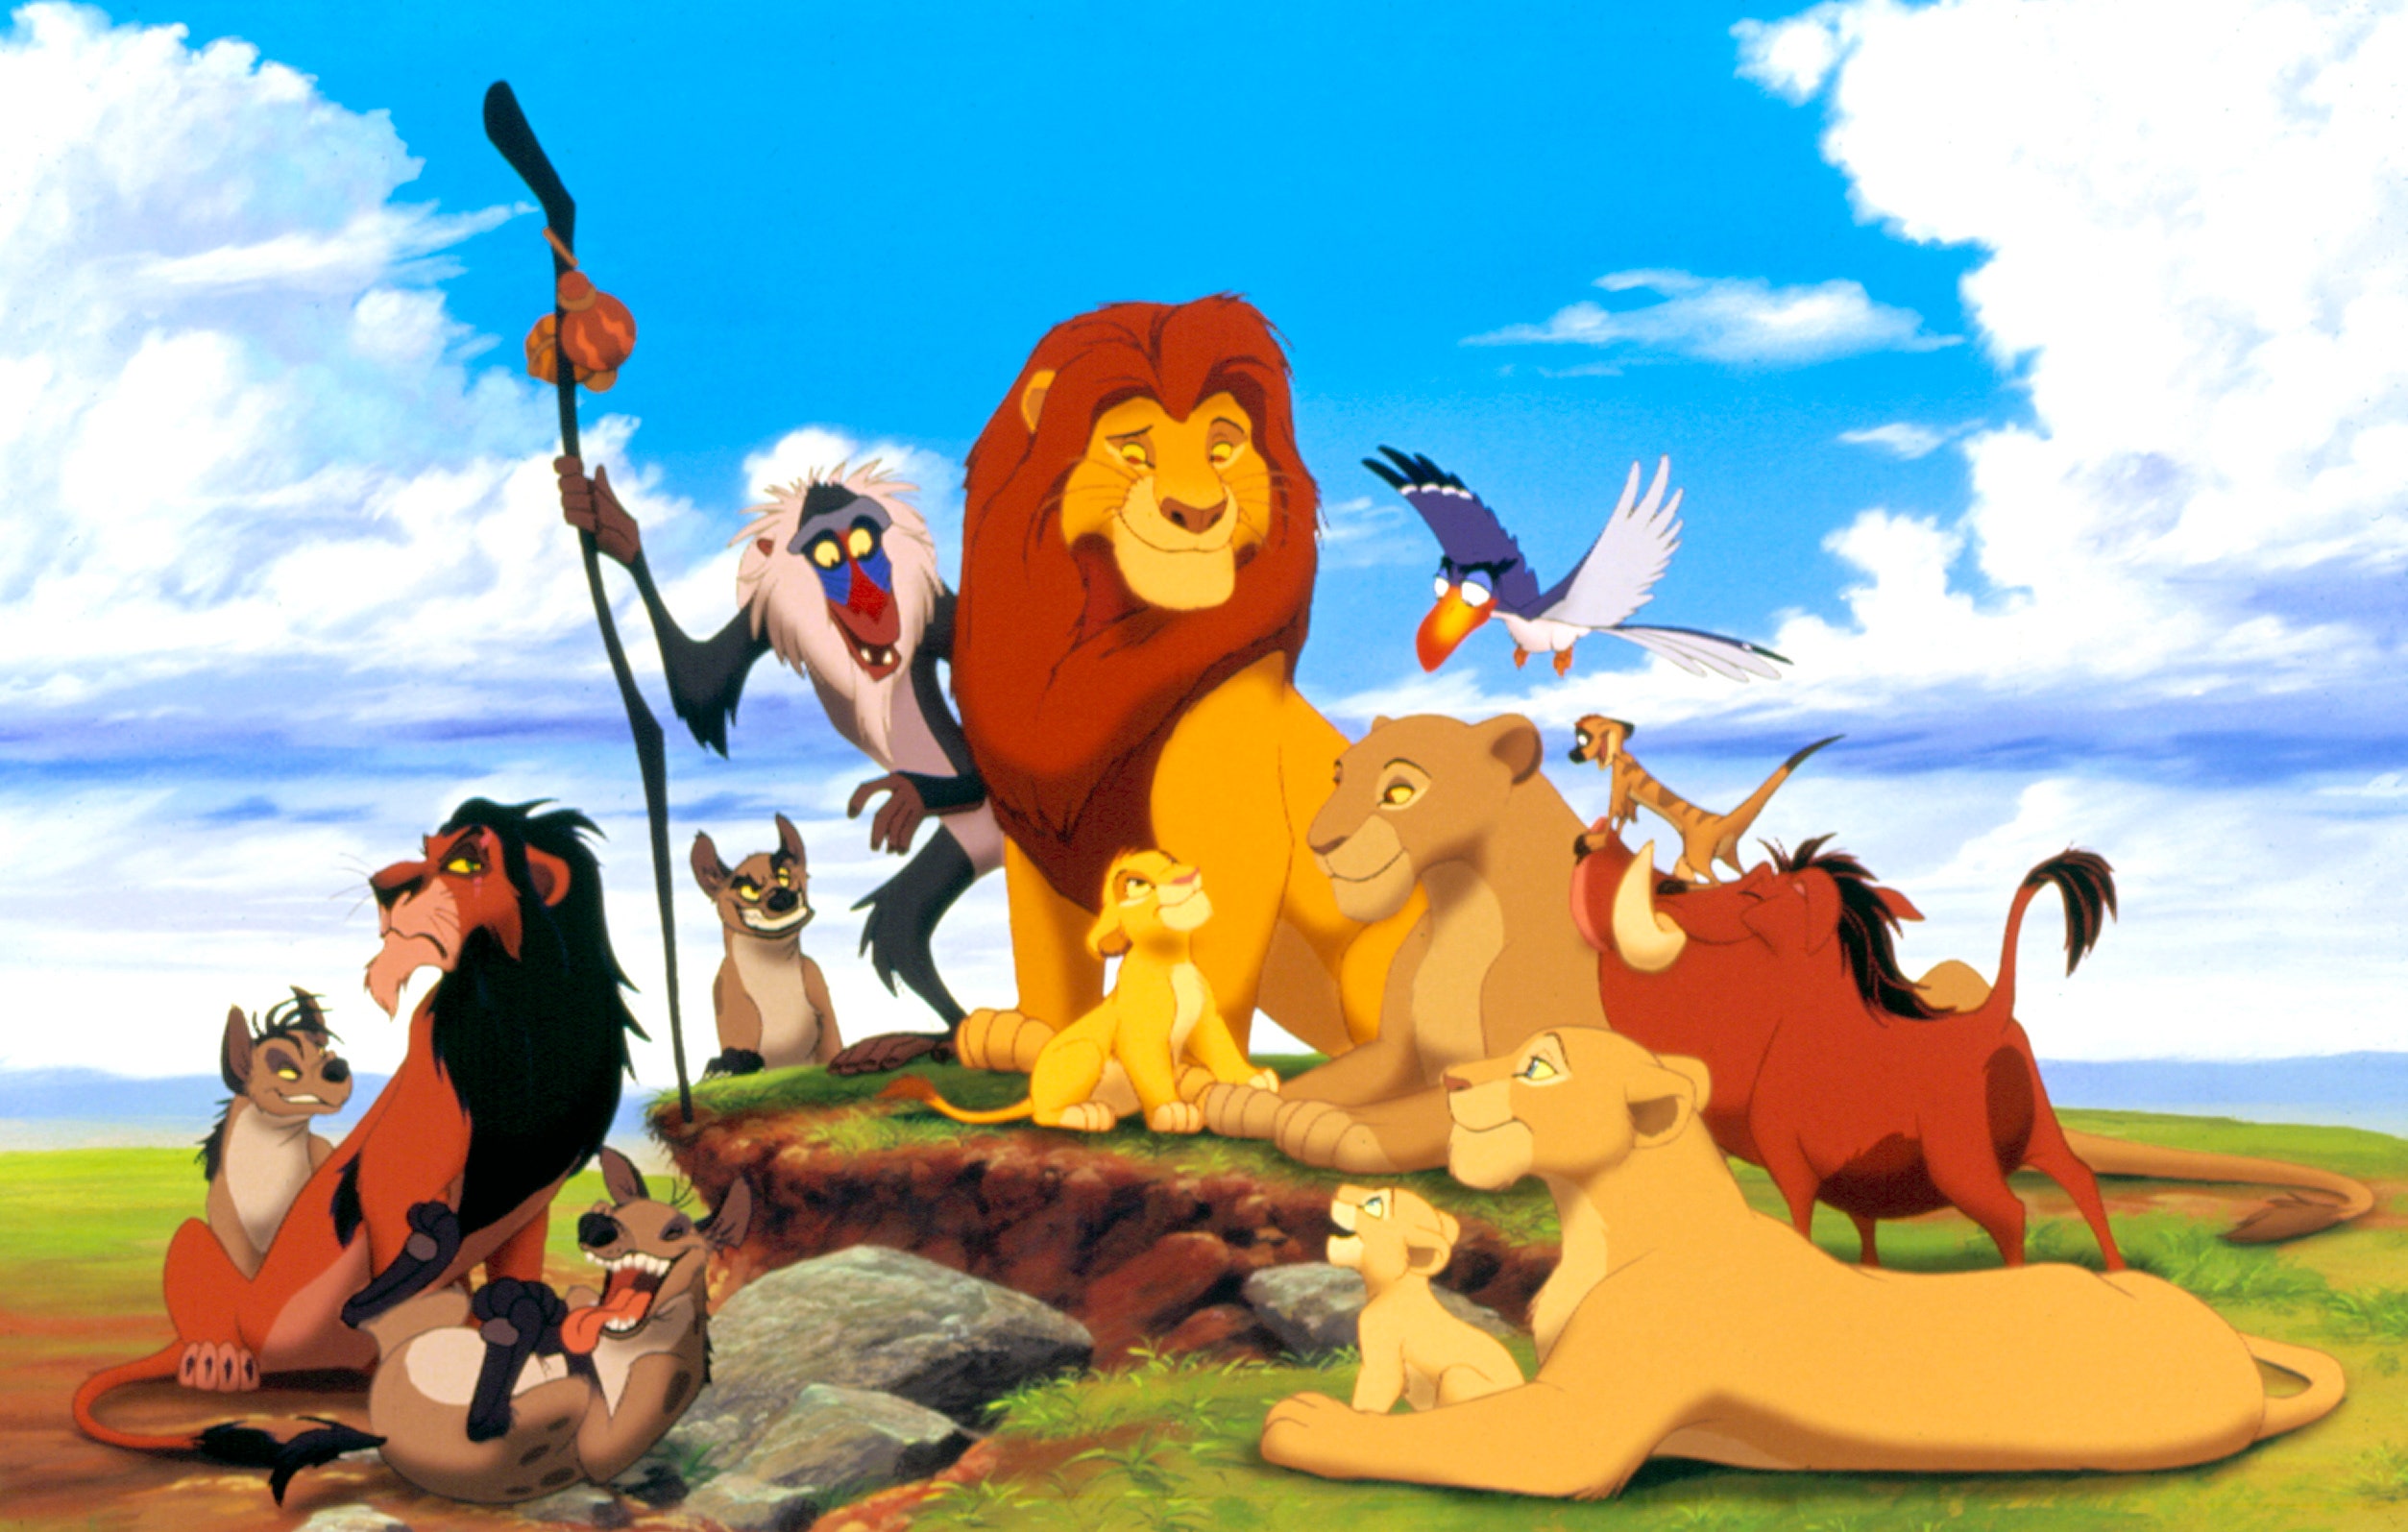 The classic movie The Lion King